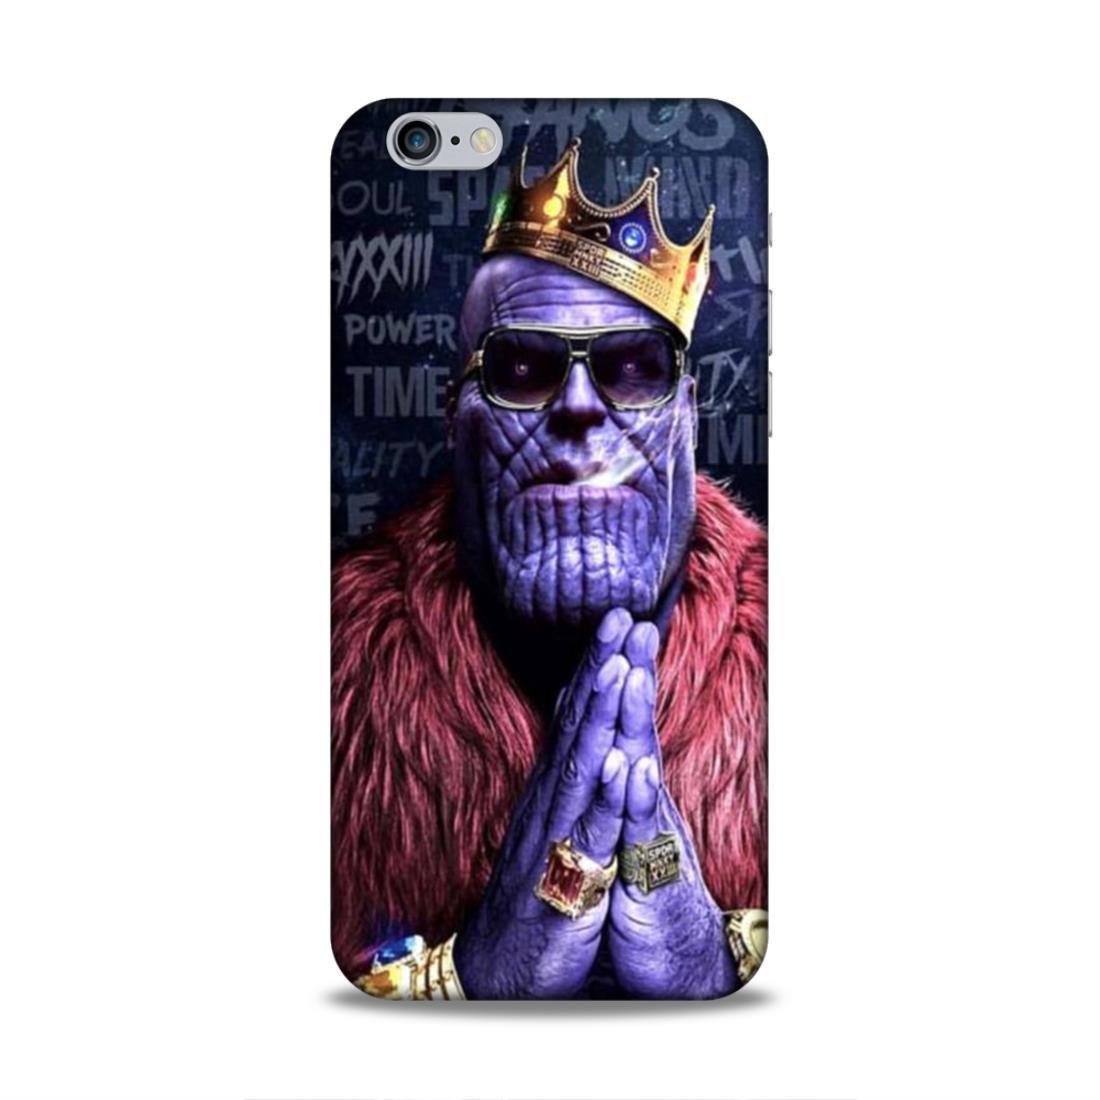 Thanoss Fanart iPhone 6s Phone Back Cover